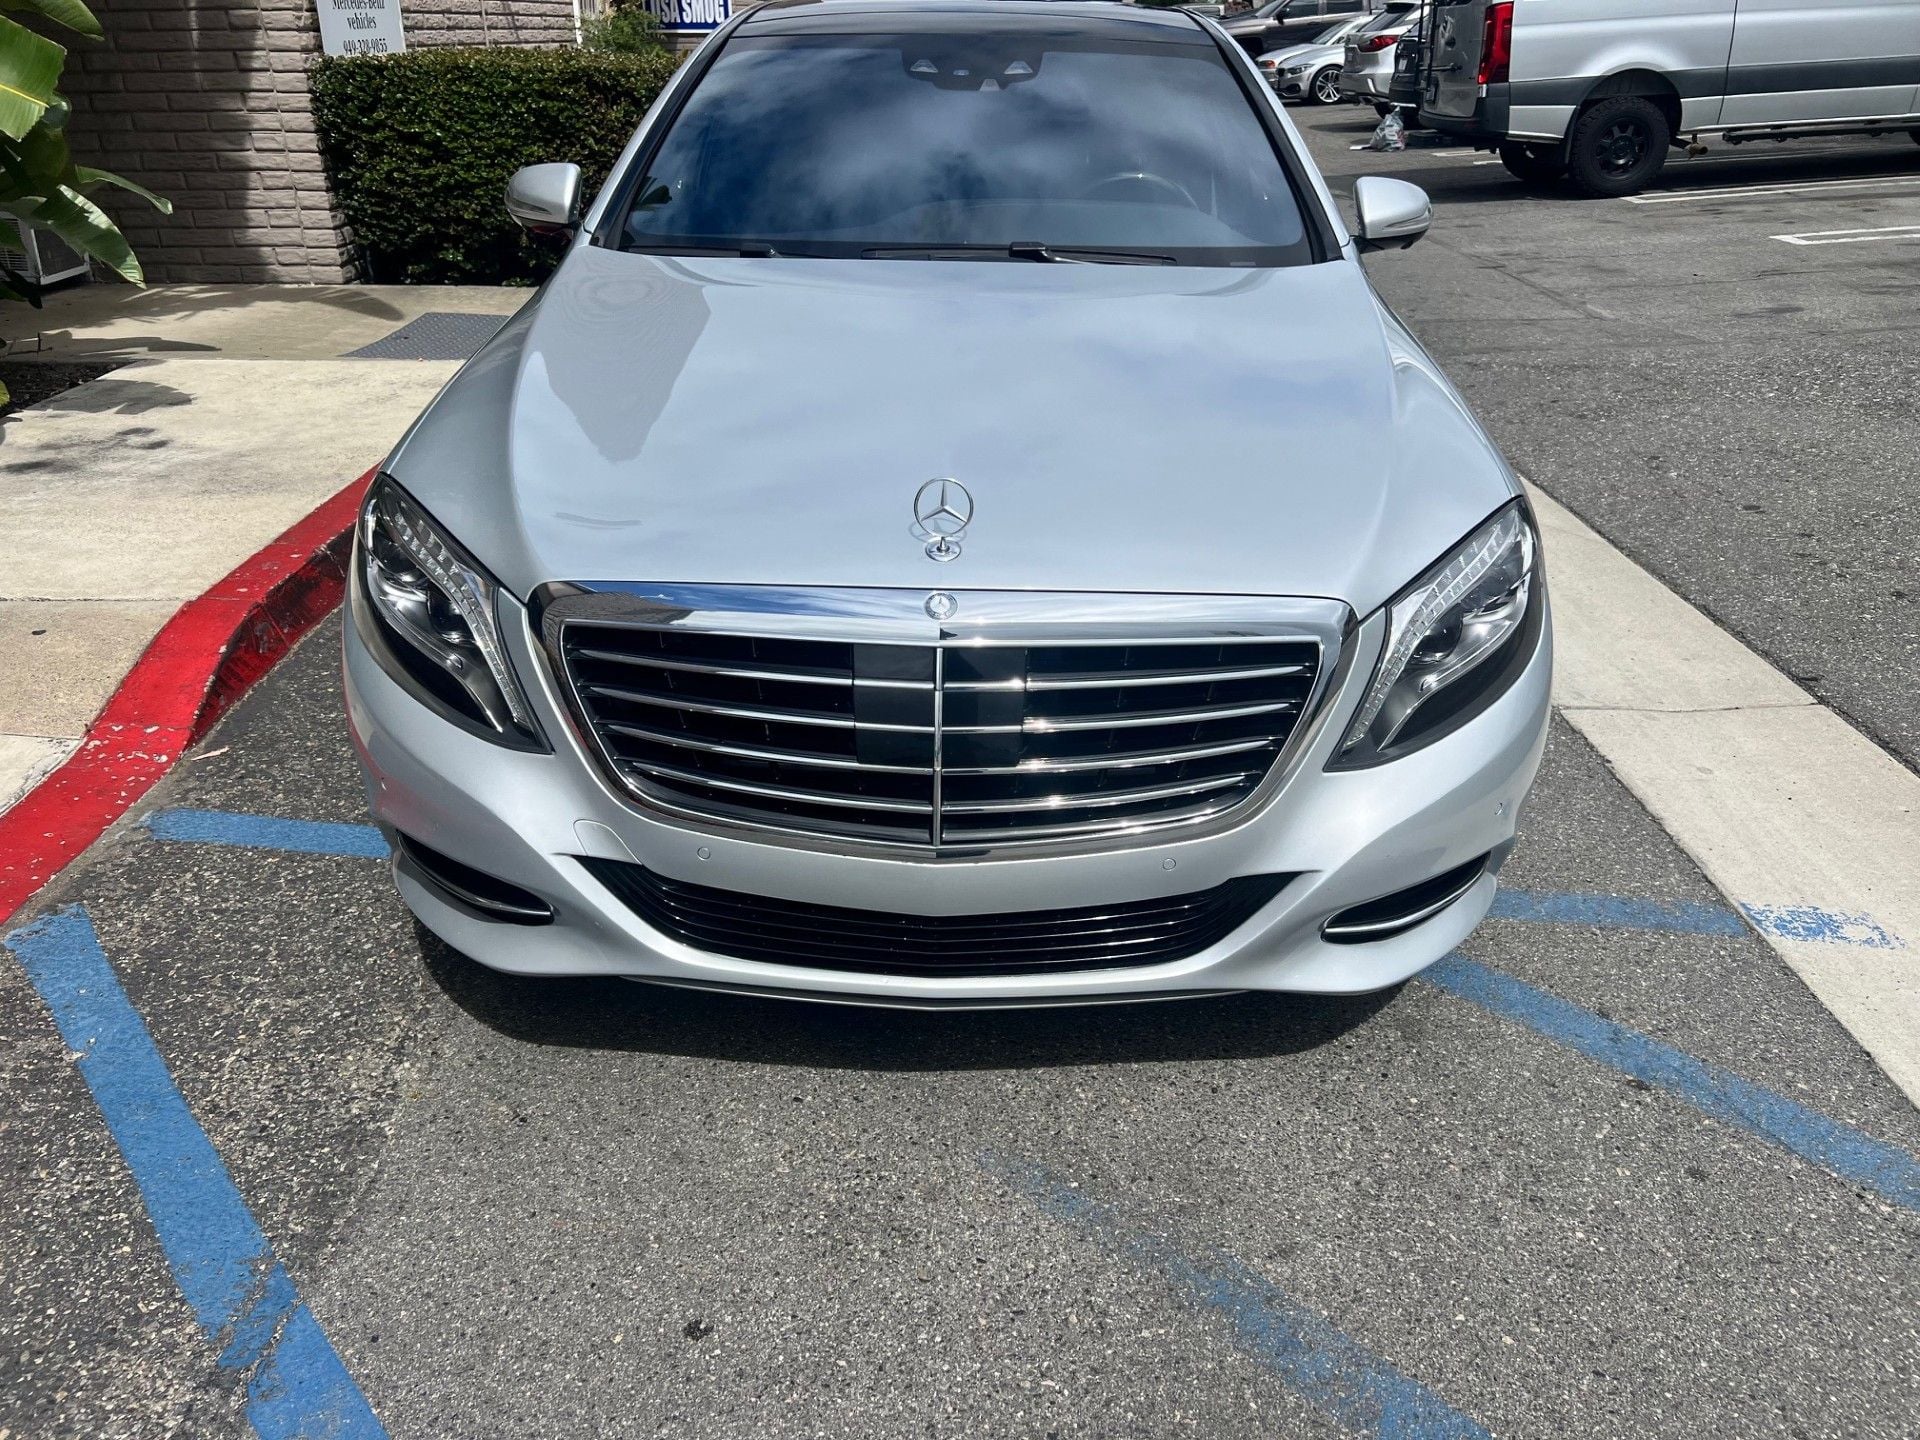 2017 Mercedes-Benz S550 - 2017 S 550 4m highly optioned, MB Master Tech Owned - Used - VIN WDDUG8FB9HA319705 - 51,900 Miles - 8 cyl - AWD - Automatic - Sedan - Silver - Mission Viejo, CA 92691, United States